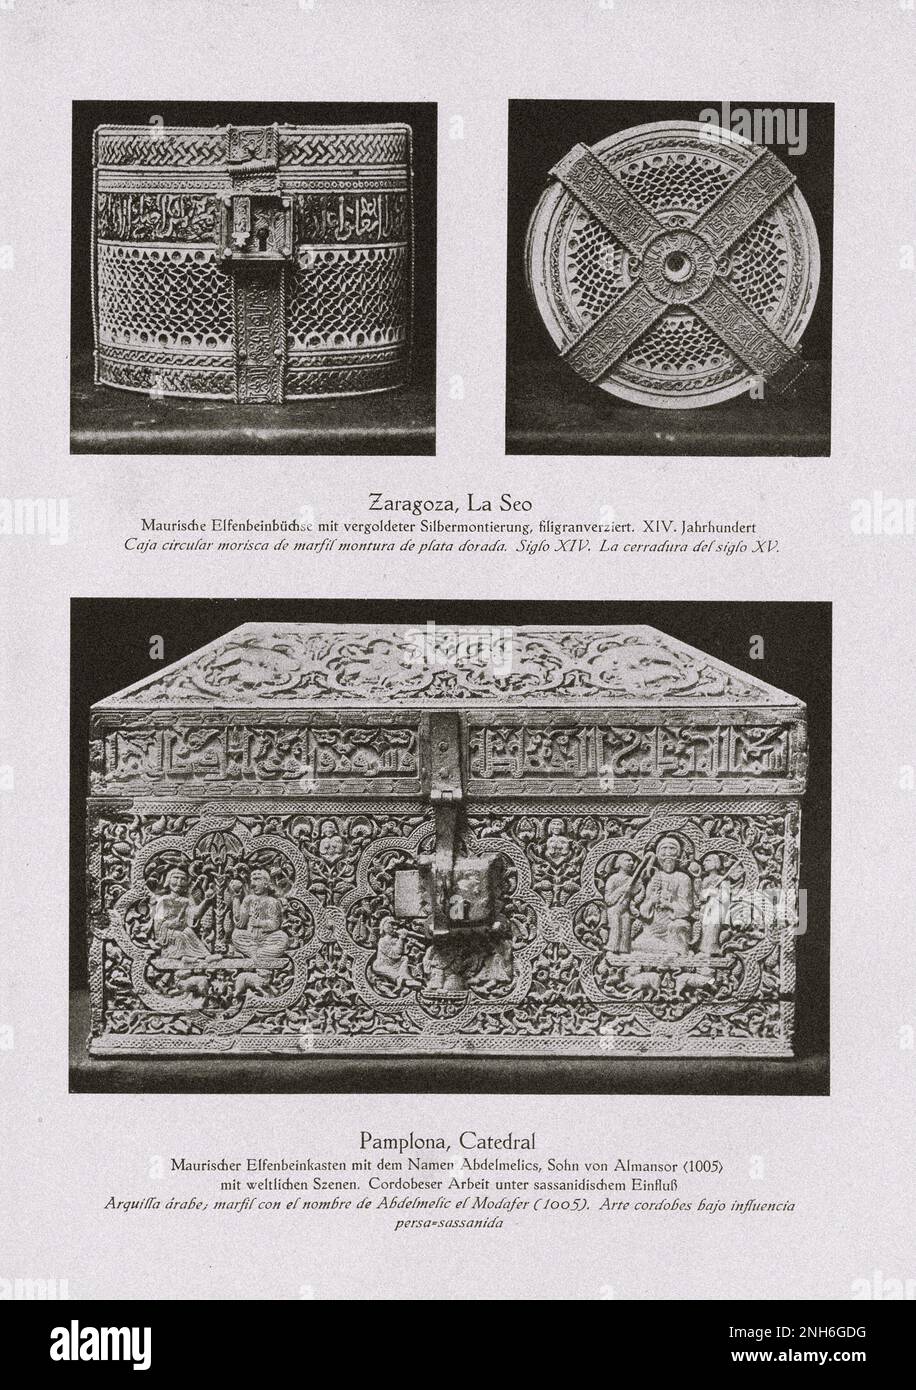 Art of Old Spain. La Seo, Zaragoza (Cathedral of the Savior of Zaragoza). Vintage photo of Moorish ivory box with gold-plated silver mount, filigree decorated. XIV century (top, left and right). Pamplona Cathedral. Moorish ivory box with the name of Abdelmelics, son of Almansor (1005) with secular scenes. Cordobese work under Sassanid influence. (bottom) Stock Photo